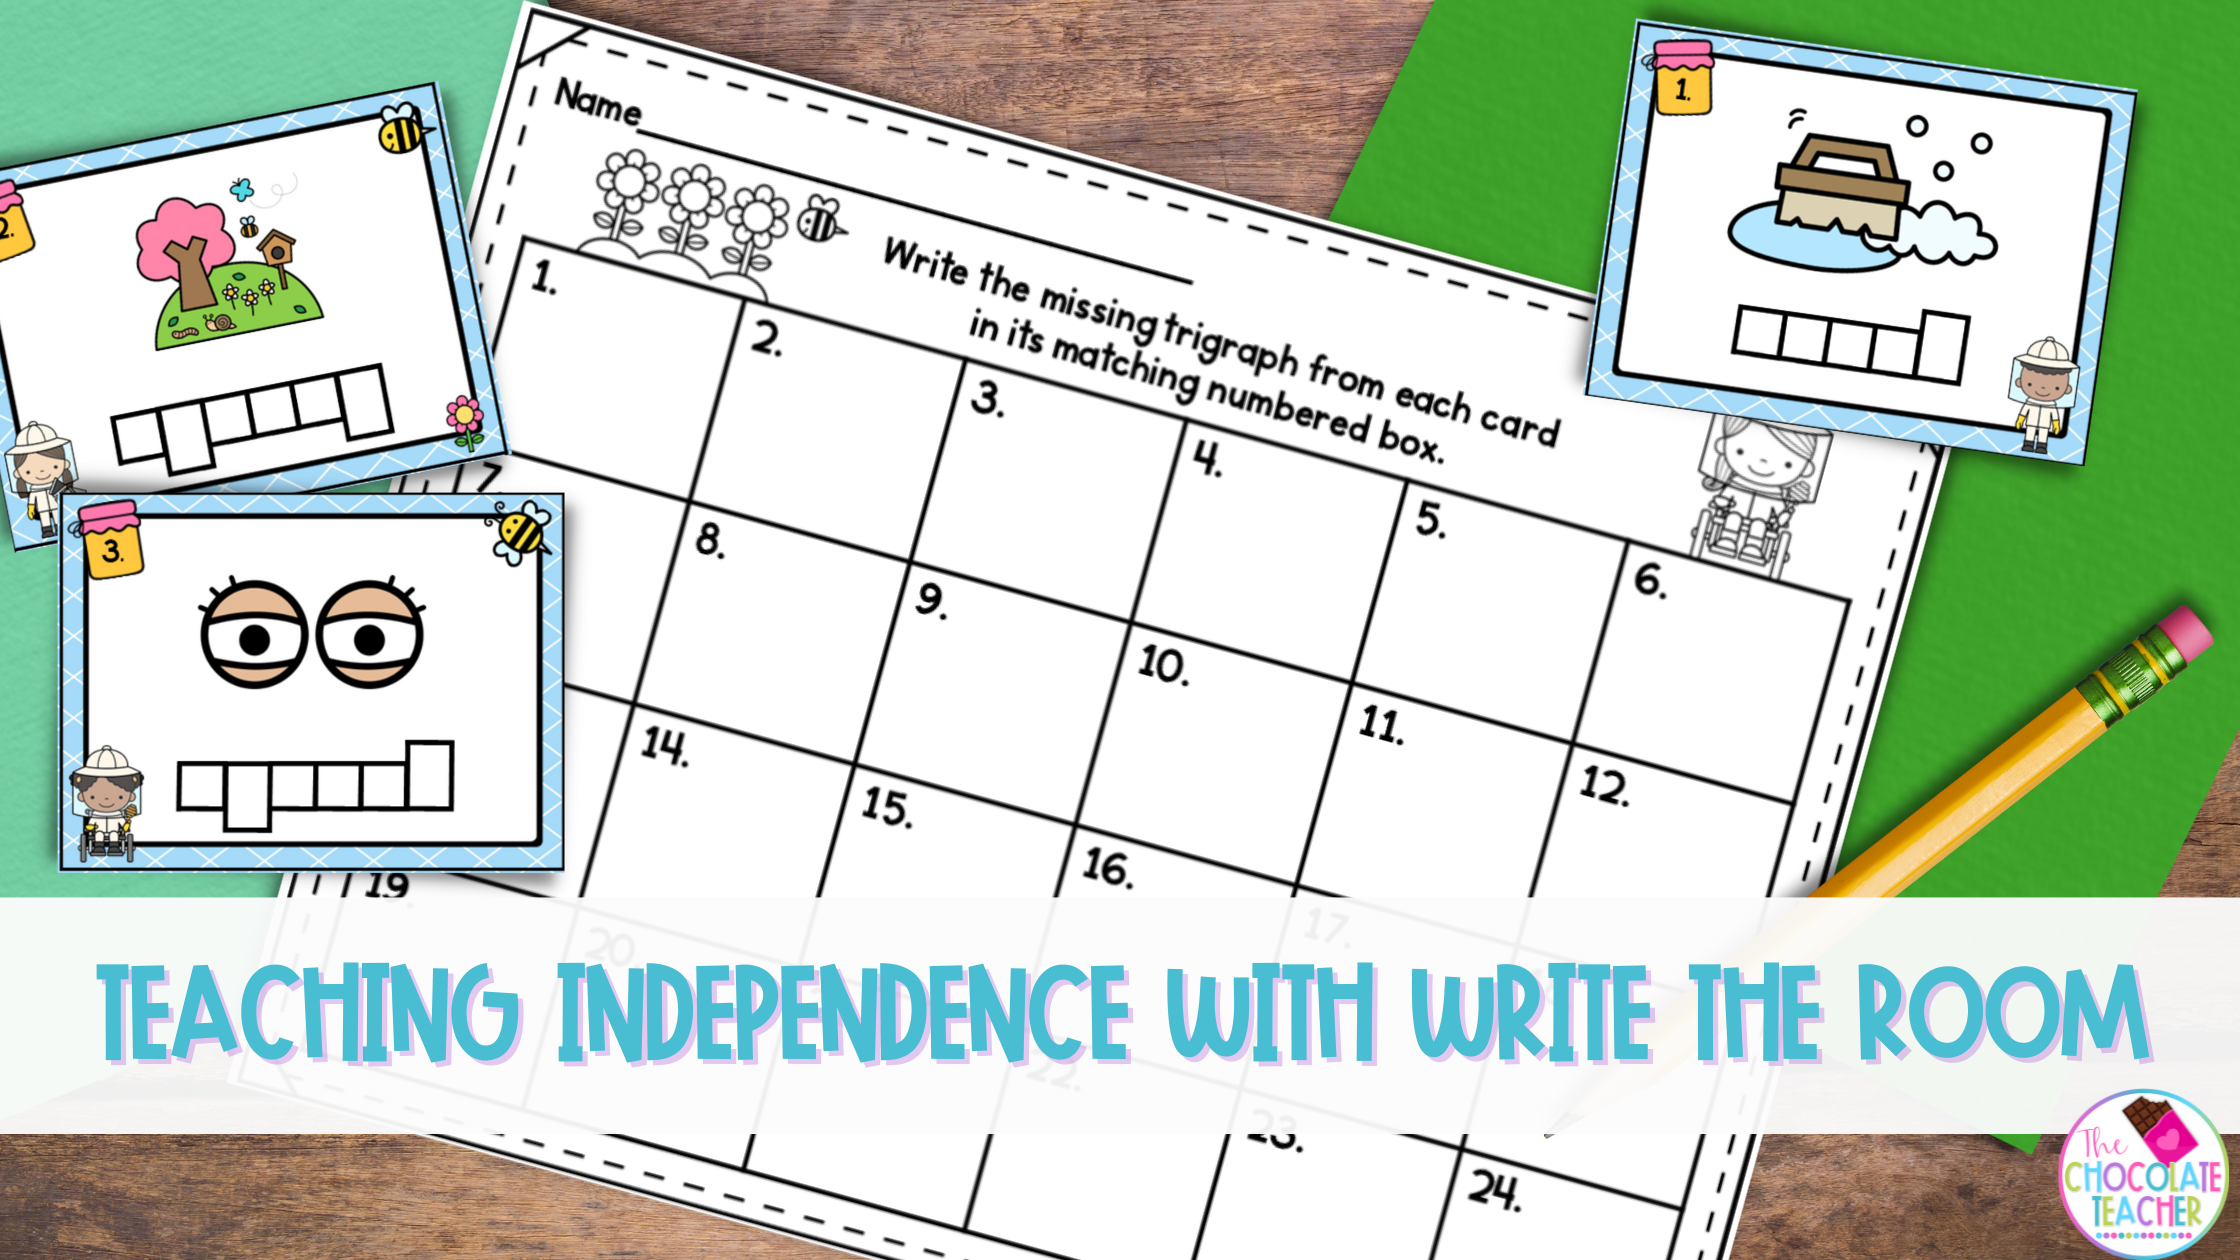 Use these tips to use write the room activities to help your students build independence.